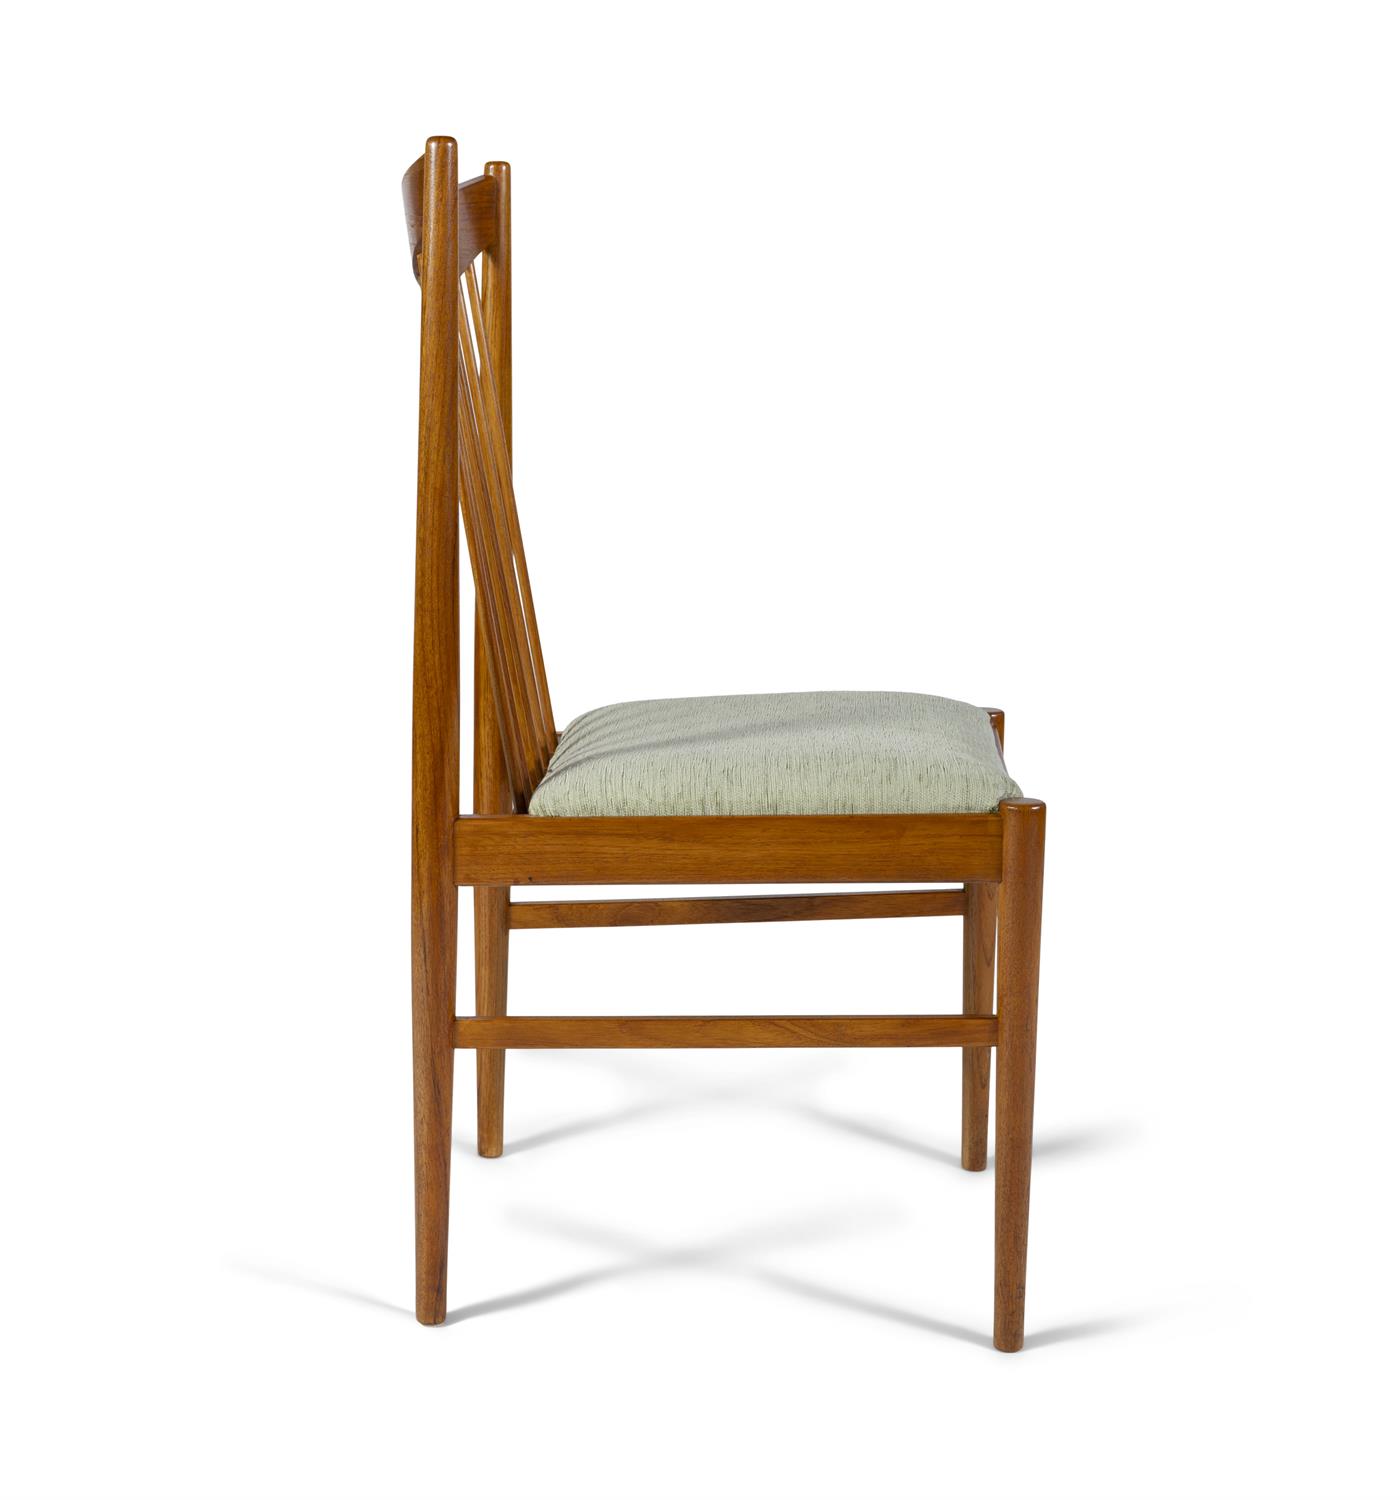 ARNE VODDER A set of eight teak dining chairs with two carvers by Arne Vodder for Sibast, - Image 5 of 7